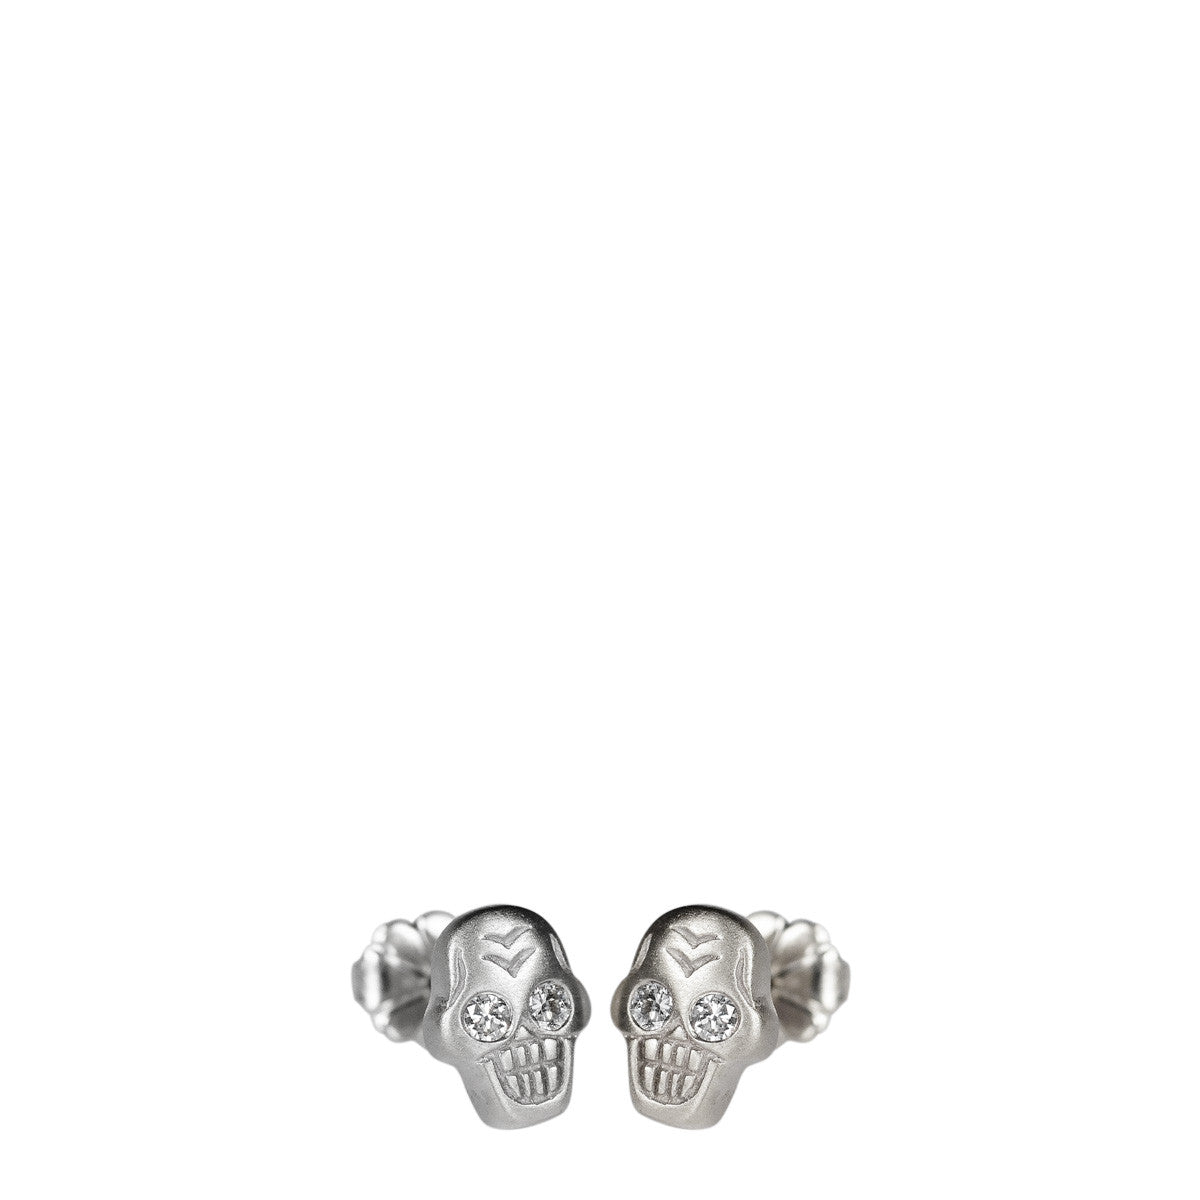 Sterling Silver Tiny Skull Stud Earrings with White Diamond Eyes